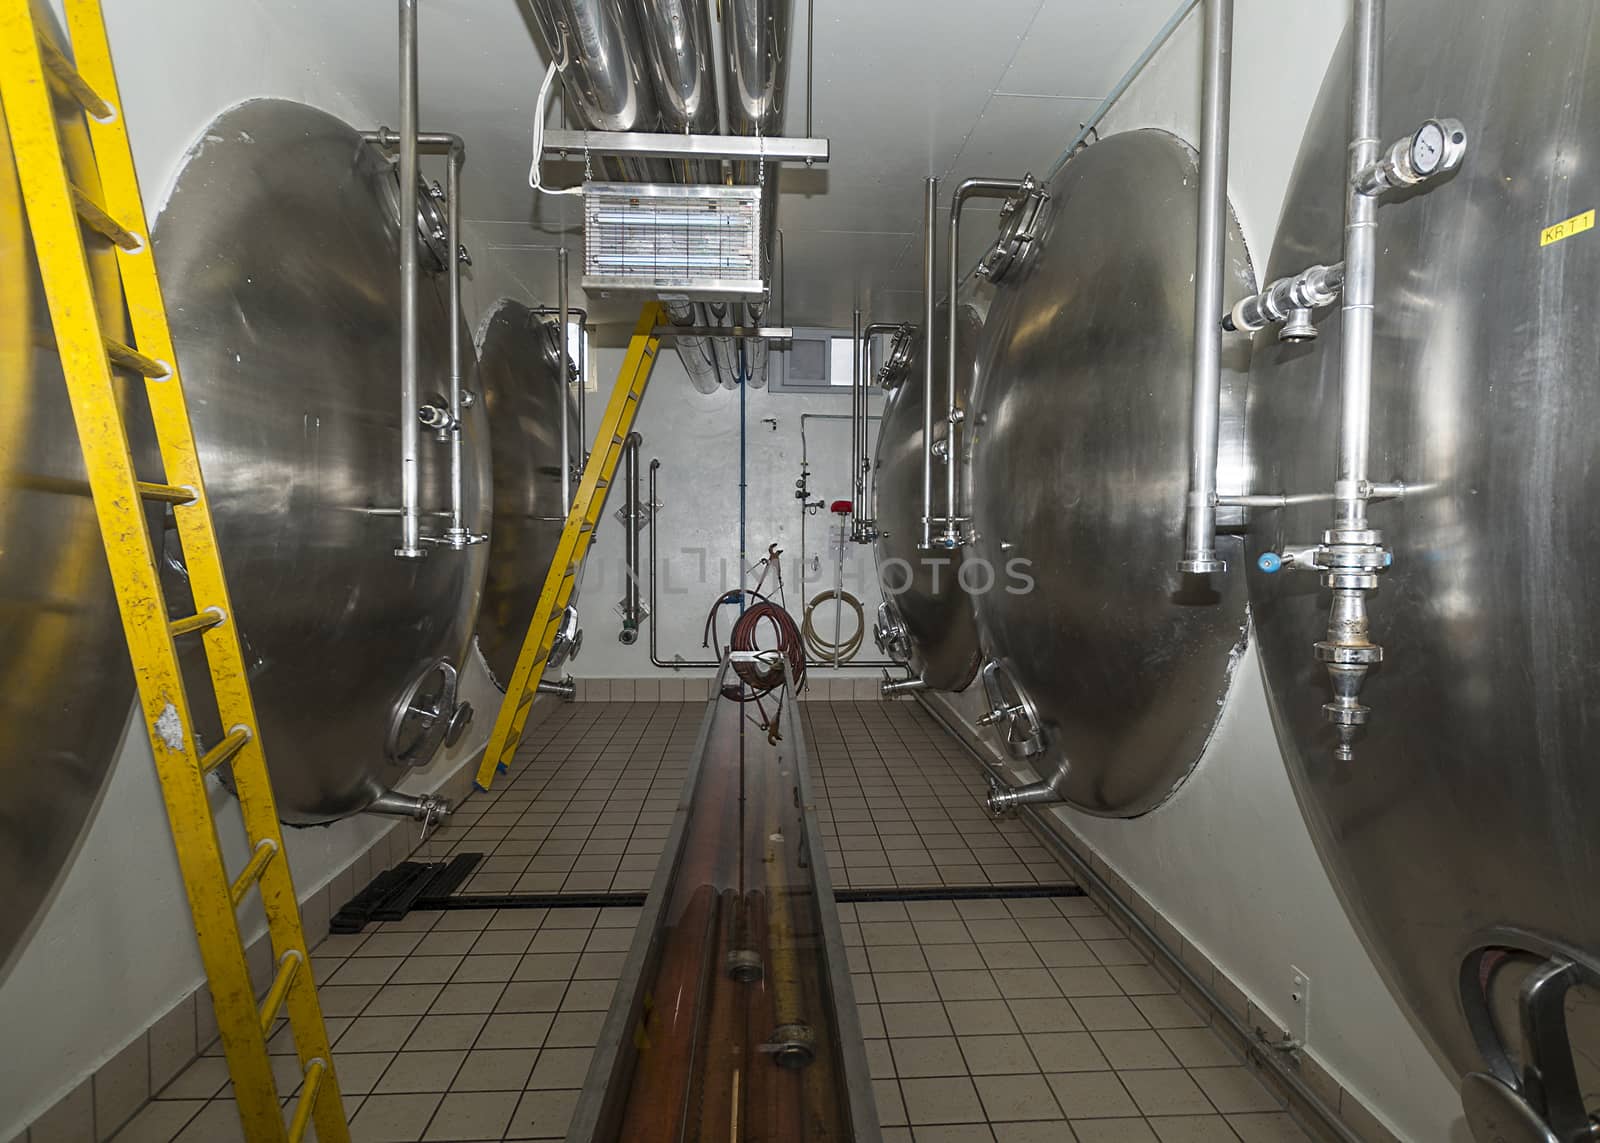 Horizontal lagering tanks in brewery. by Claudine